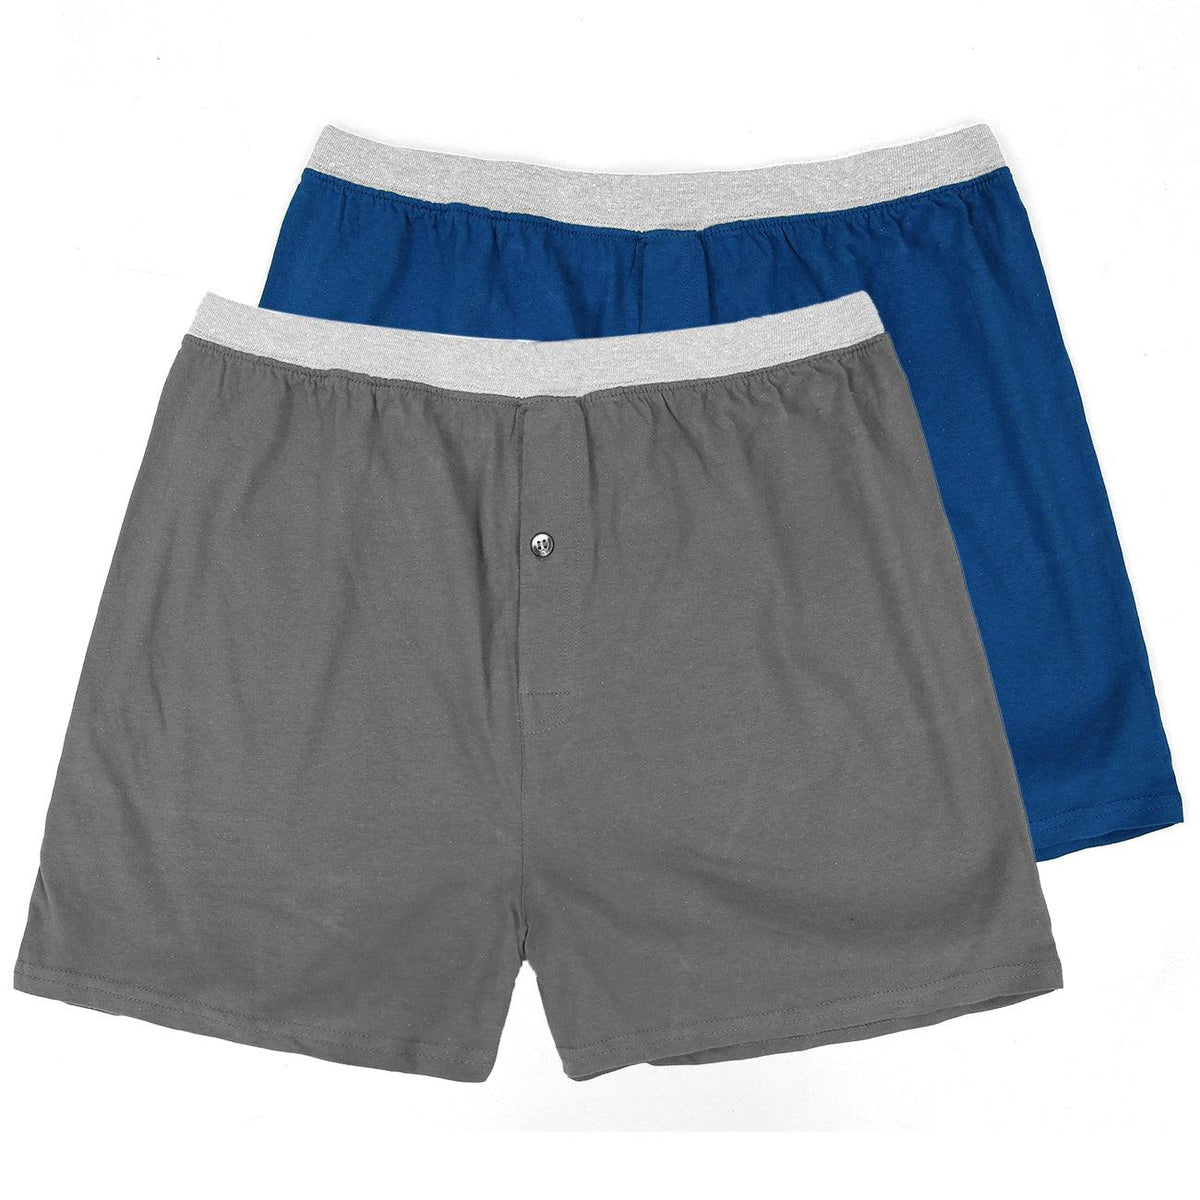 Cotton 1x1 New 100% Cotton Fly Front Boxer by Calida